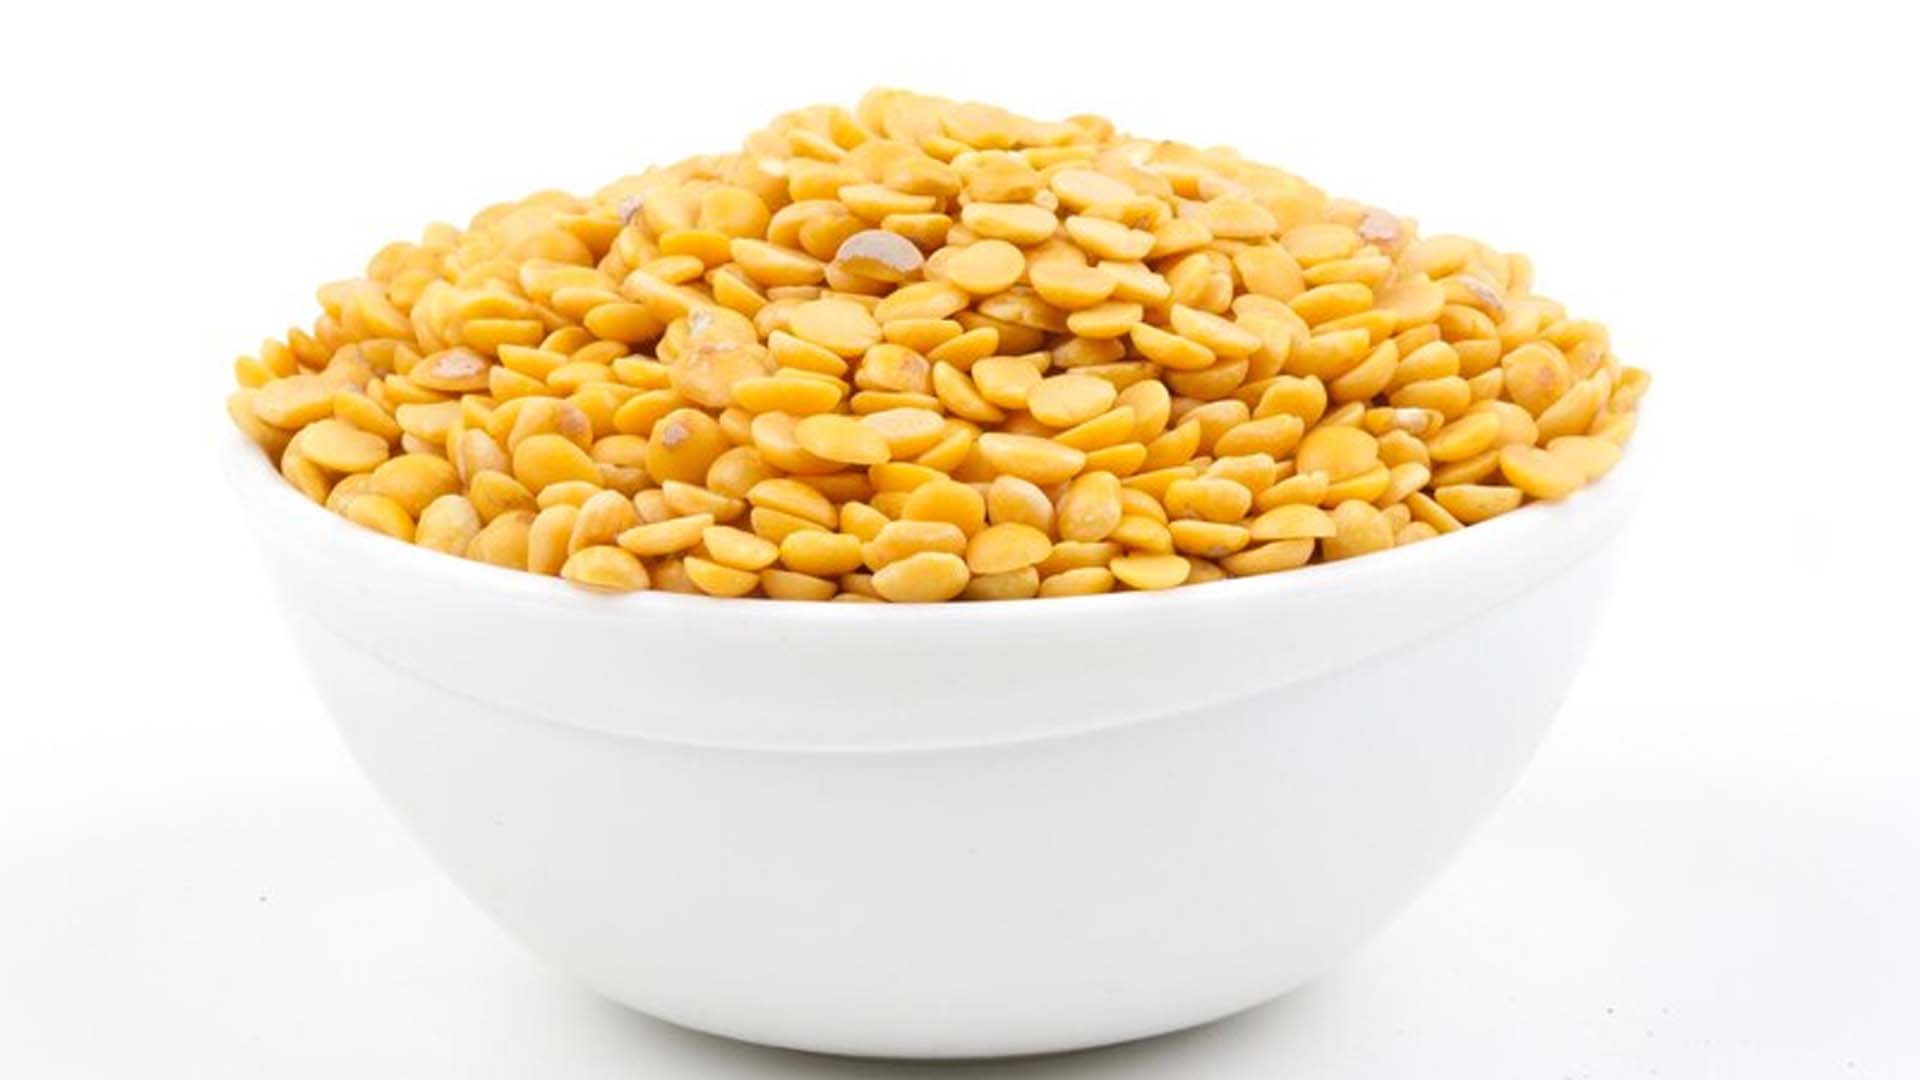 Health Benefits and Nutritional Values of Toor Dal (Pigeon Pea)